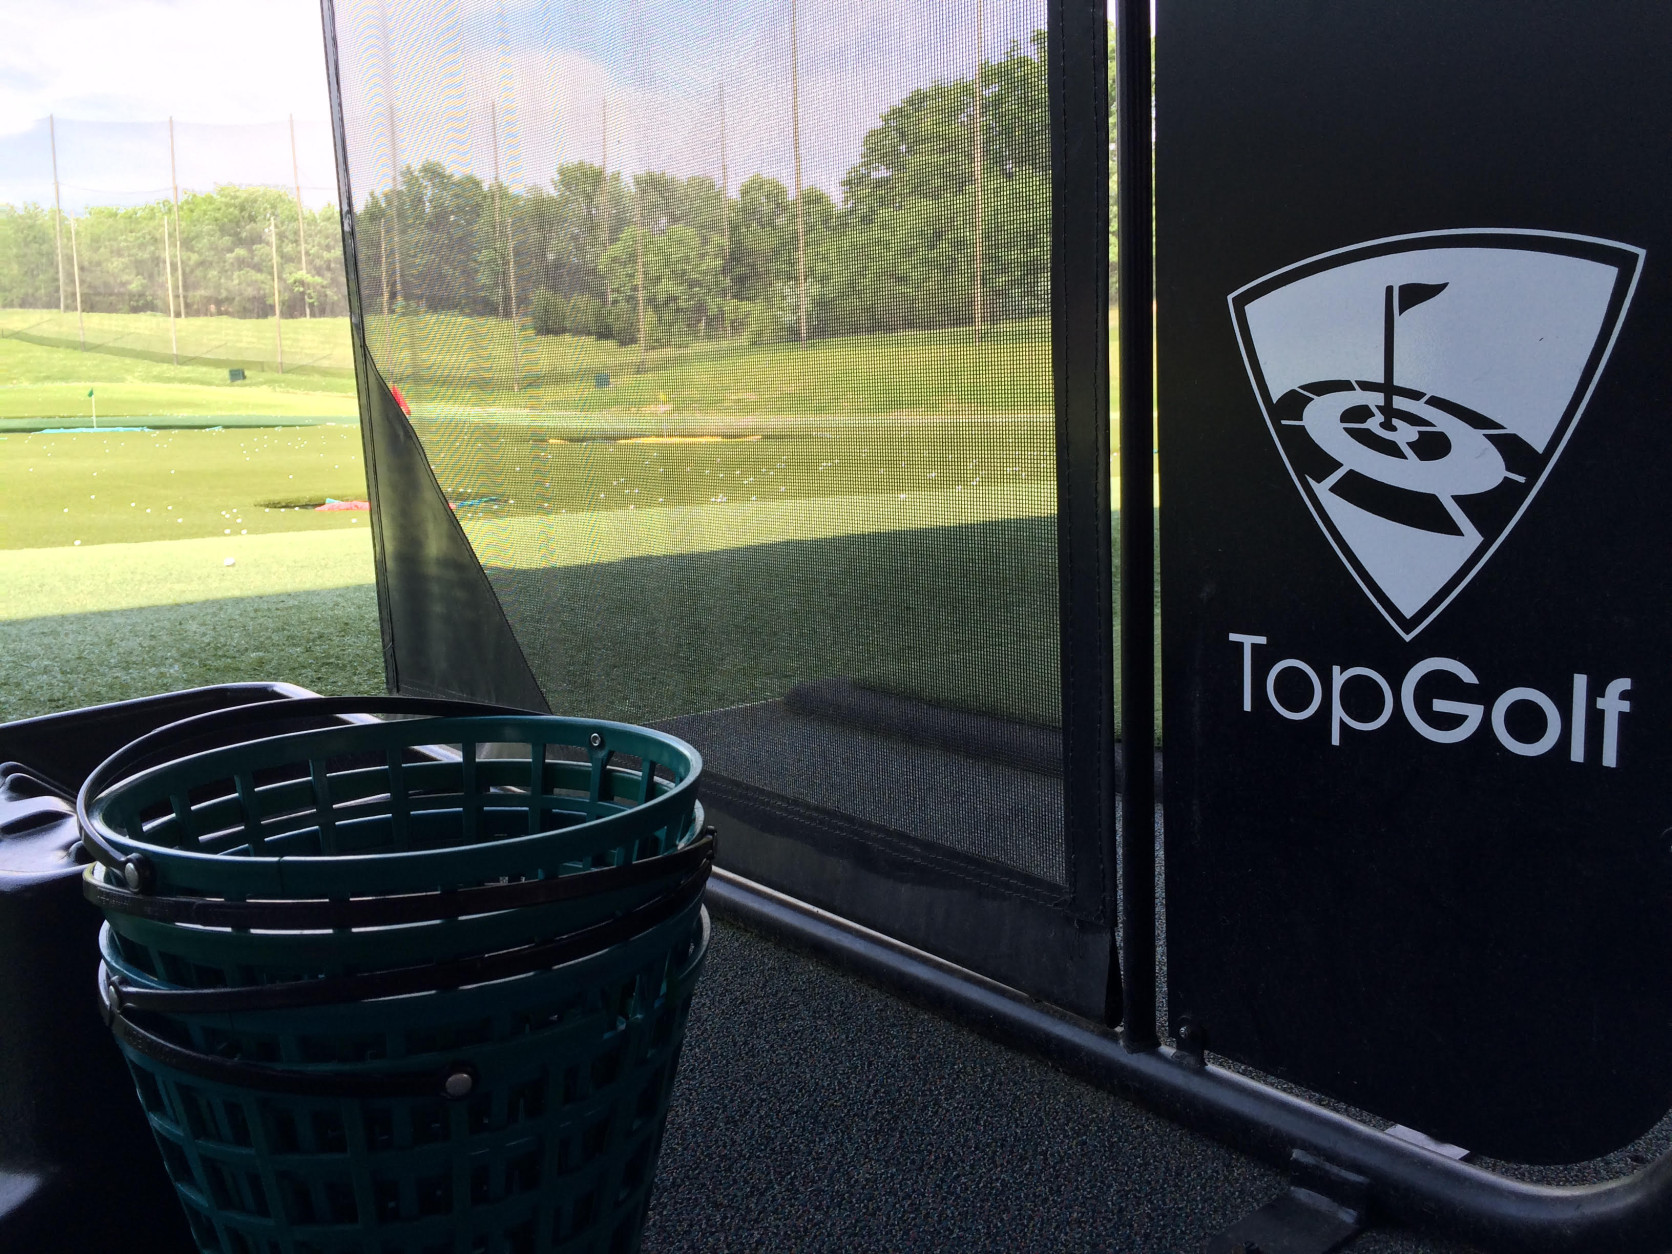 TopGolf's Alexandria location was its first to open in the U.S. in 2005. (WTOP/Noah Frank)